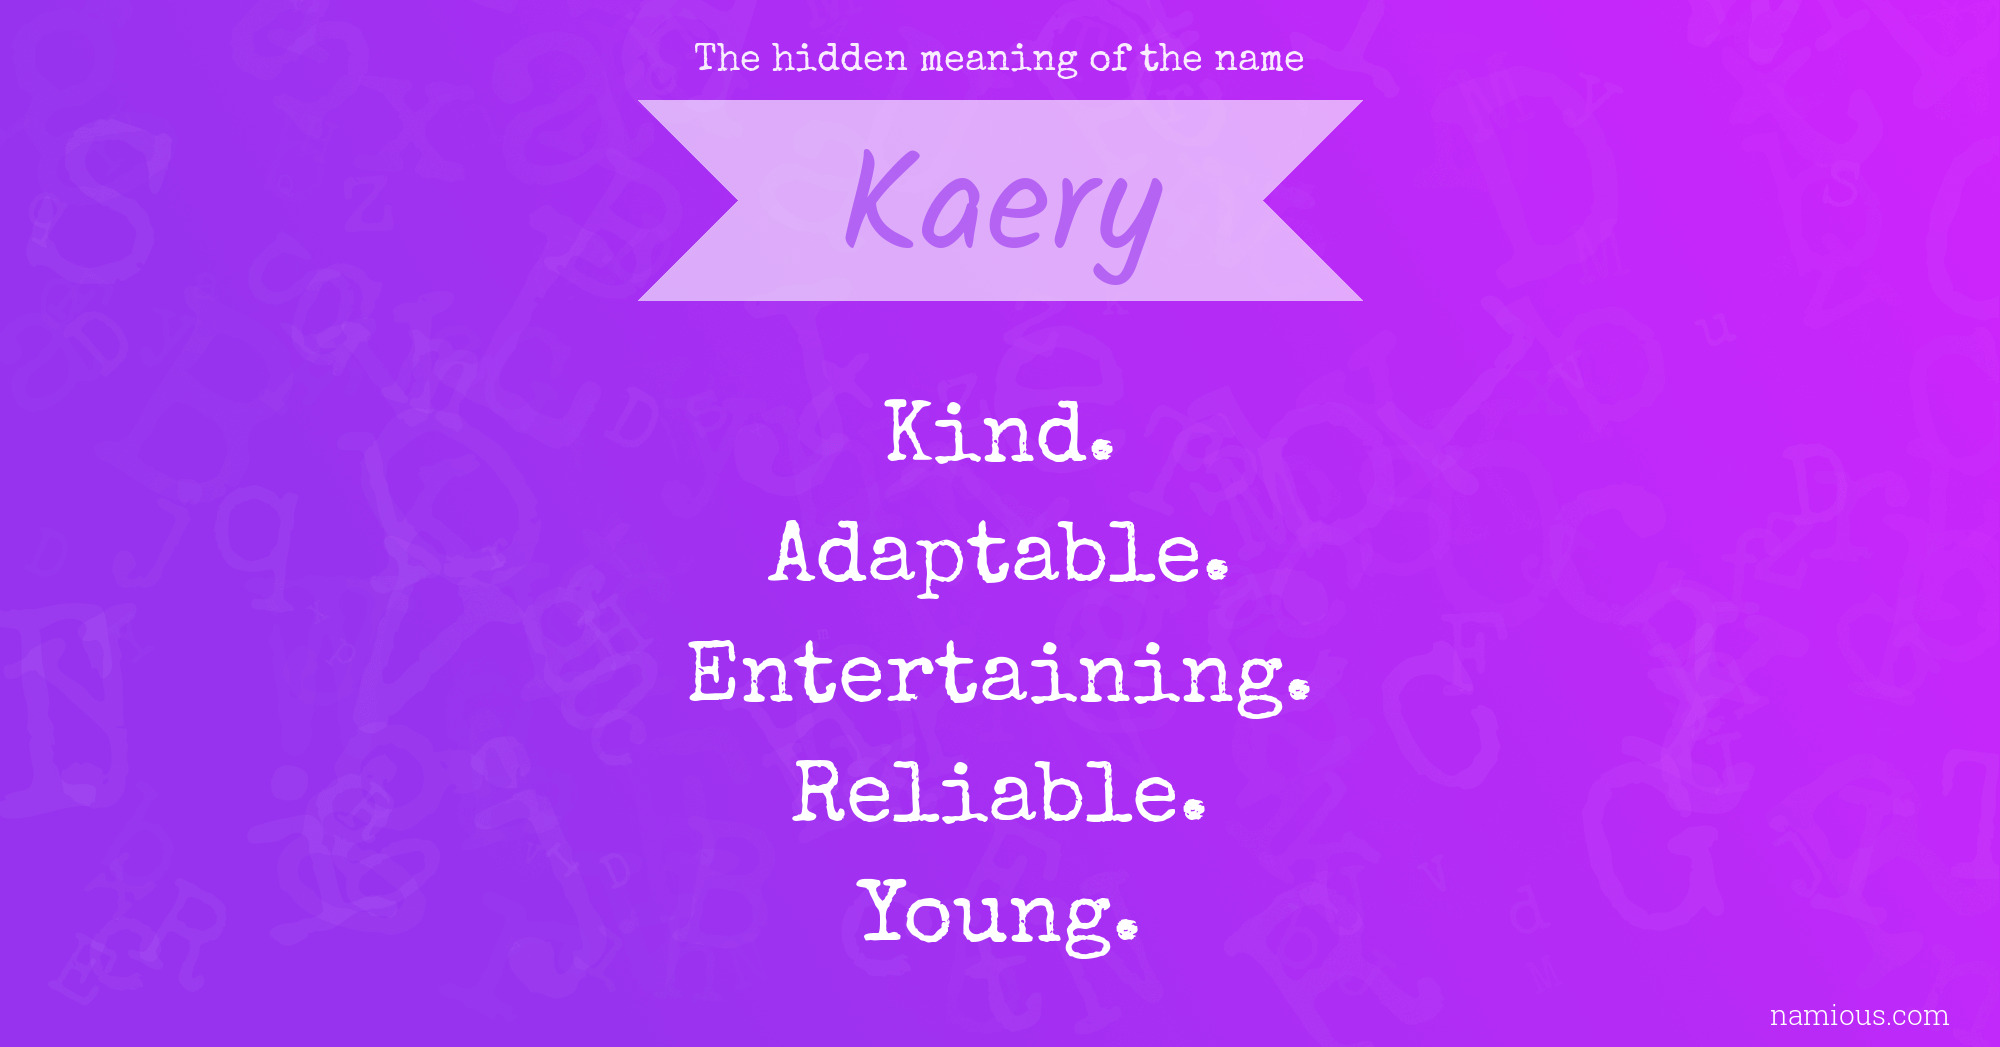 The hidden meaning of the name Kaery